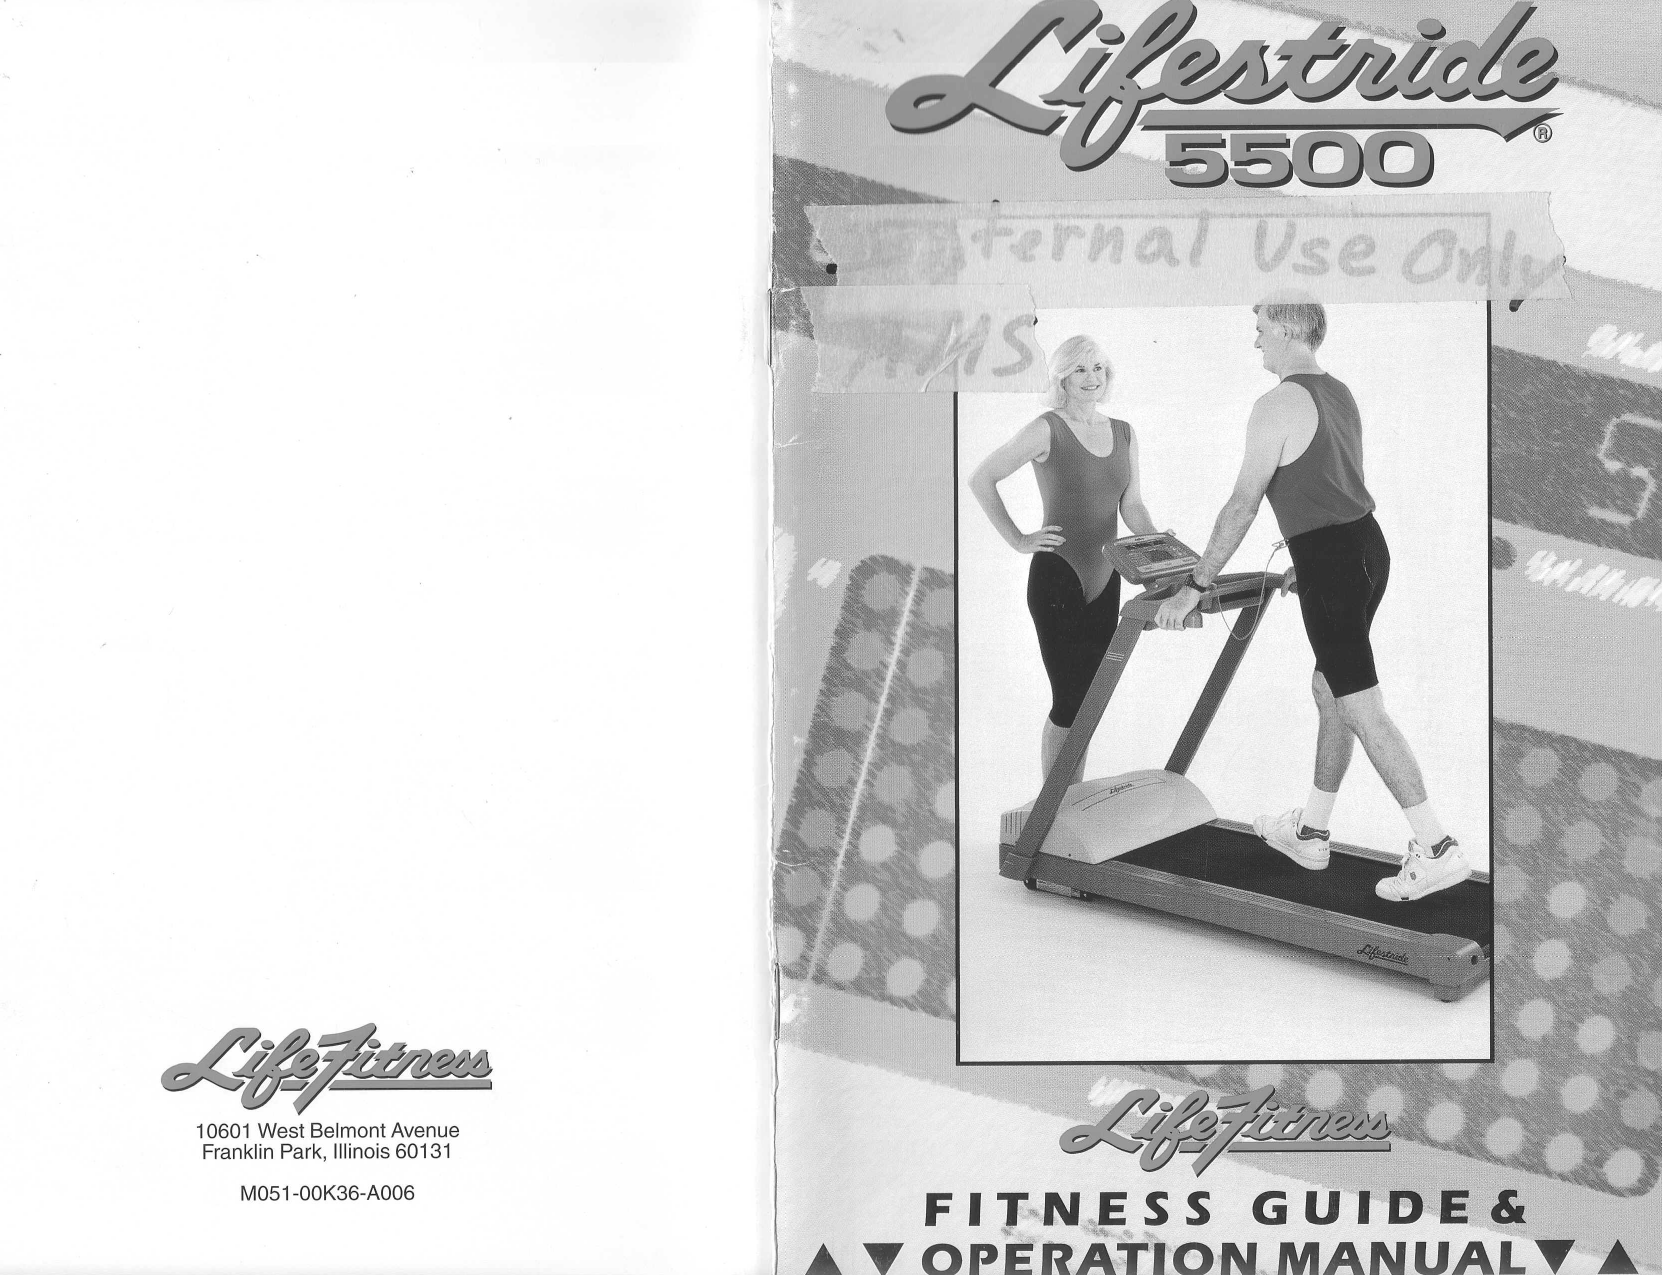 Life fitness lifecycle 5500 manual